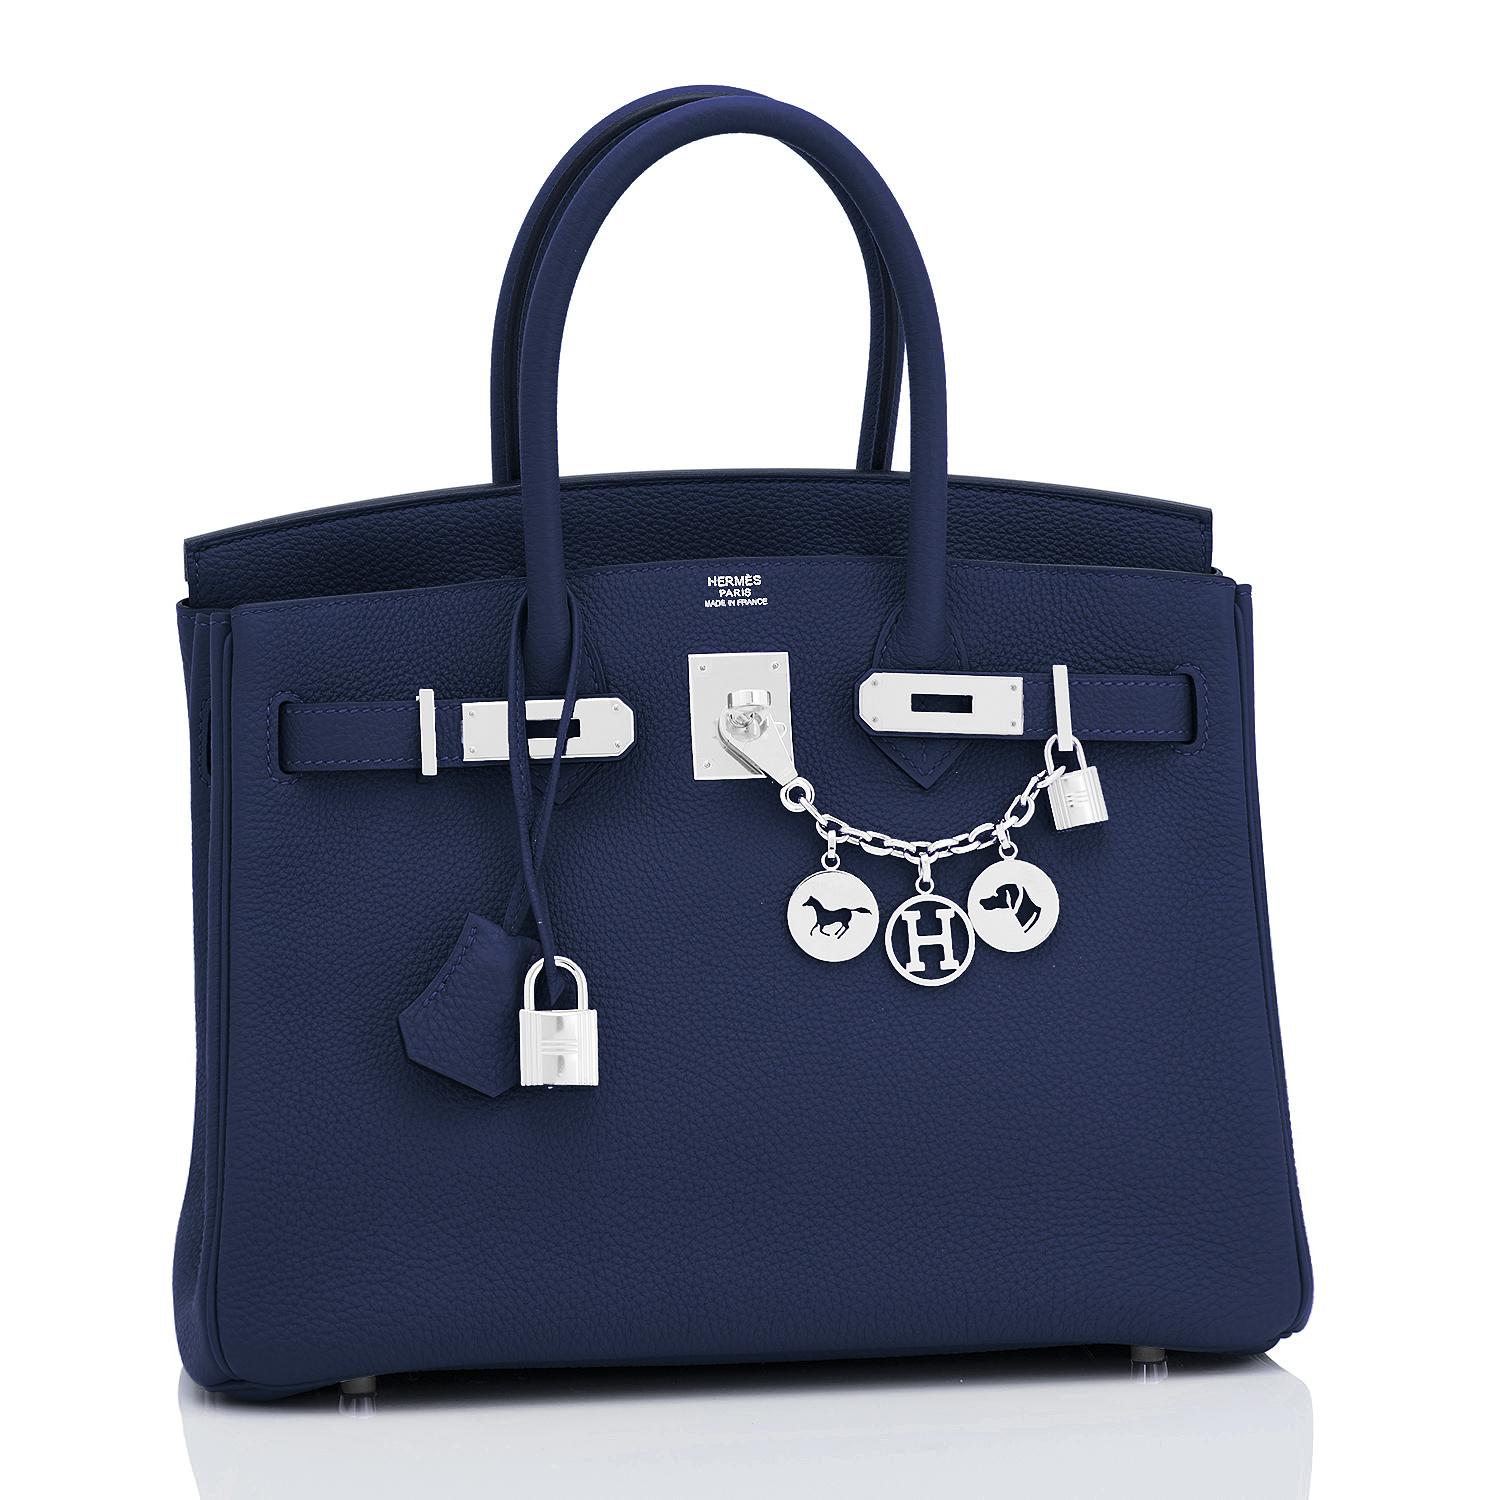 Hermes Blue Nuit Navy Jewel Tone Birkin 30cm Togo Palladium Bag Y Stamp, 2020
Devastatingly gorgeous!
Brand New in Box.  Store Fresh.  Pristine Condition (with plastic on hardware).
Just purchased from Hermes store! Bag bears new interior 2020 Y